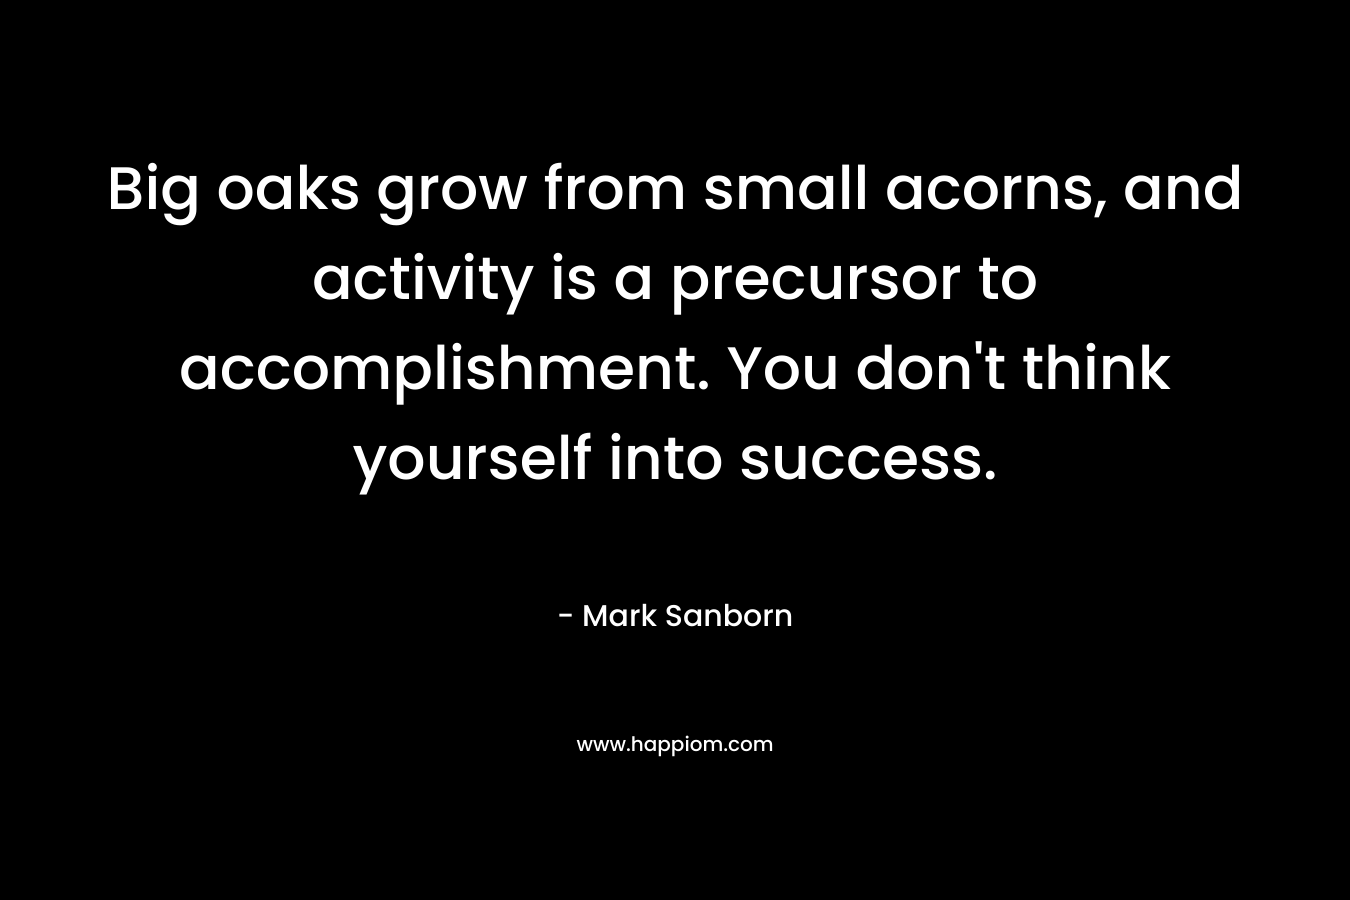 Big oaks grow from small acorns, and activity is a precursor to accomplishment. You don't think yourself into success.